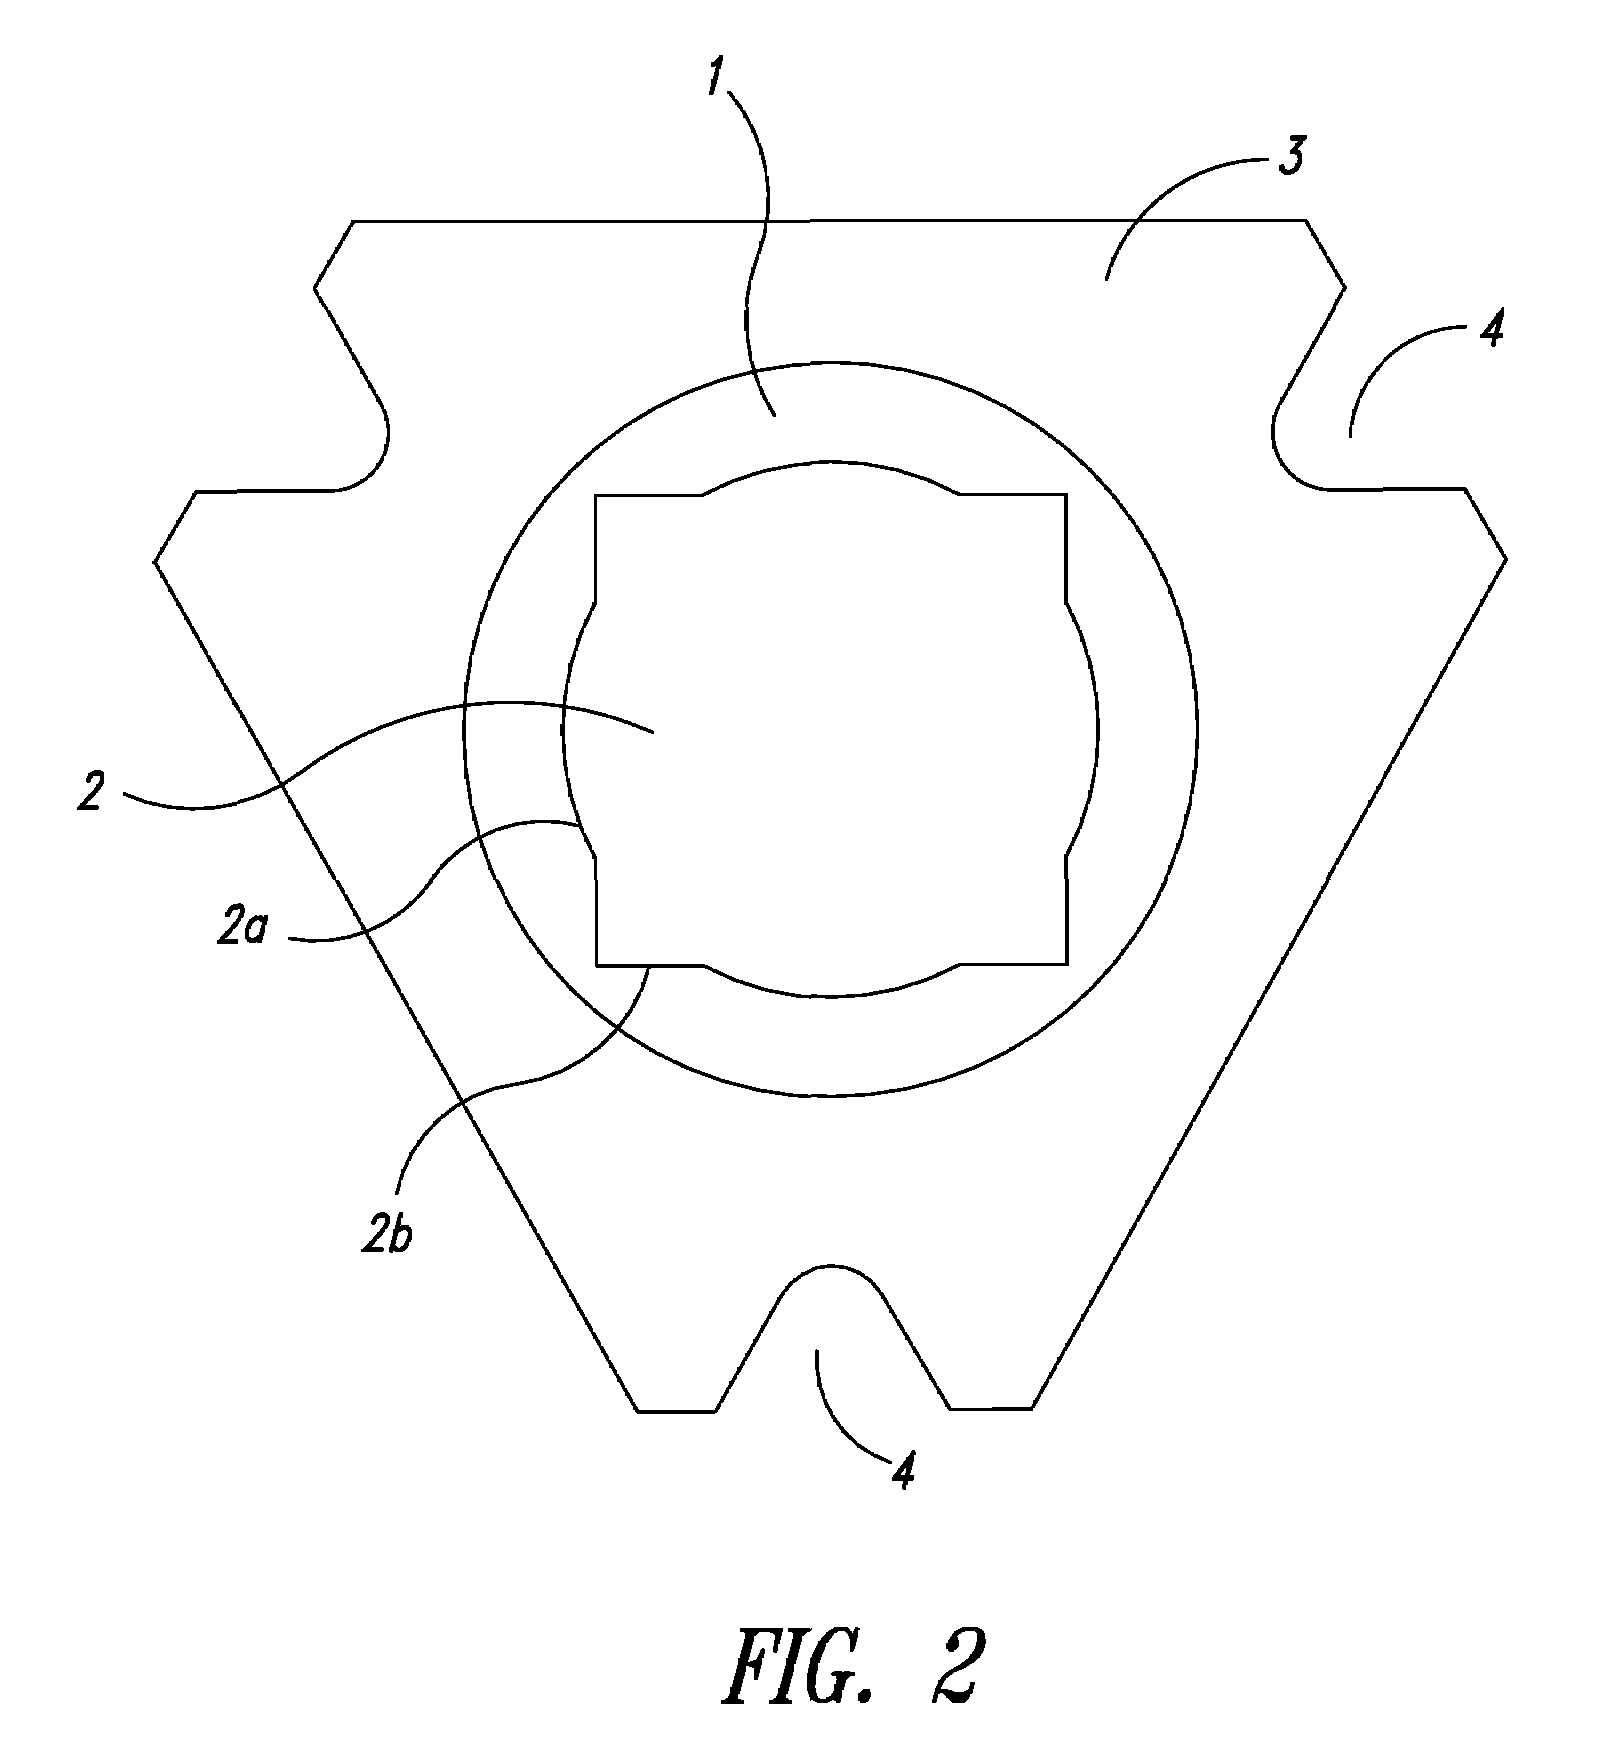 Flanged base and breakaway system connector for road accessory posts